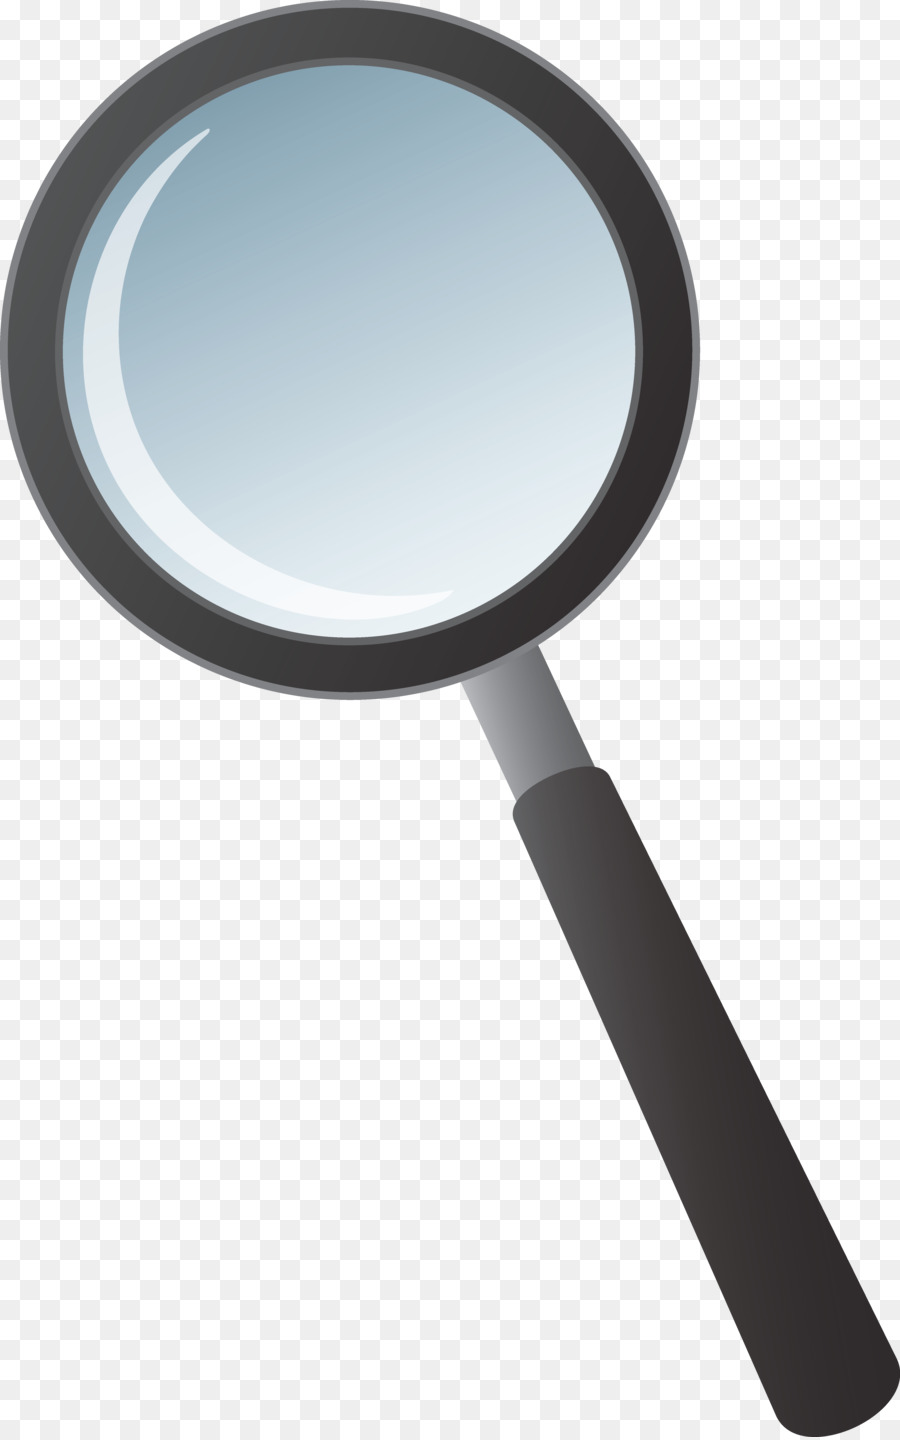 Magnifying glass Free content Clip art - Magnifying Glass Cliparts png download - 4855*7753 - Free Transparent Magnifying Glass png Download.